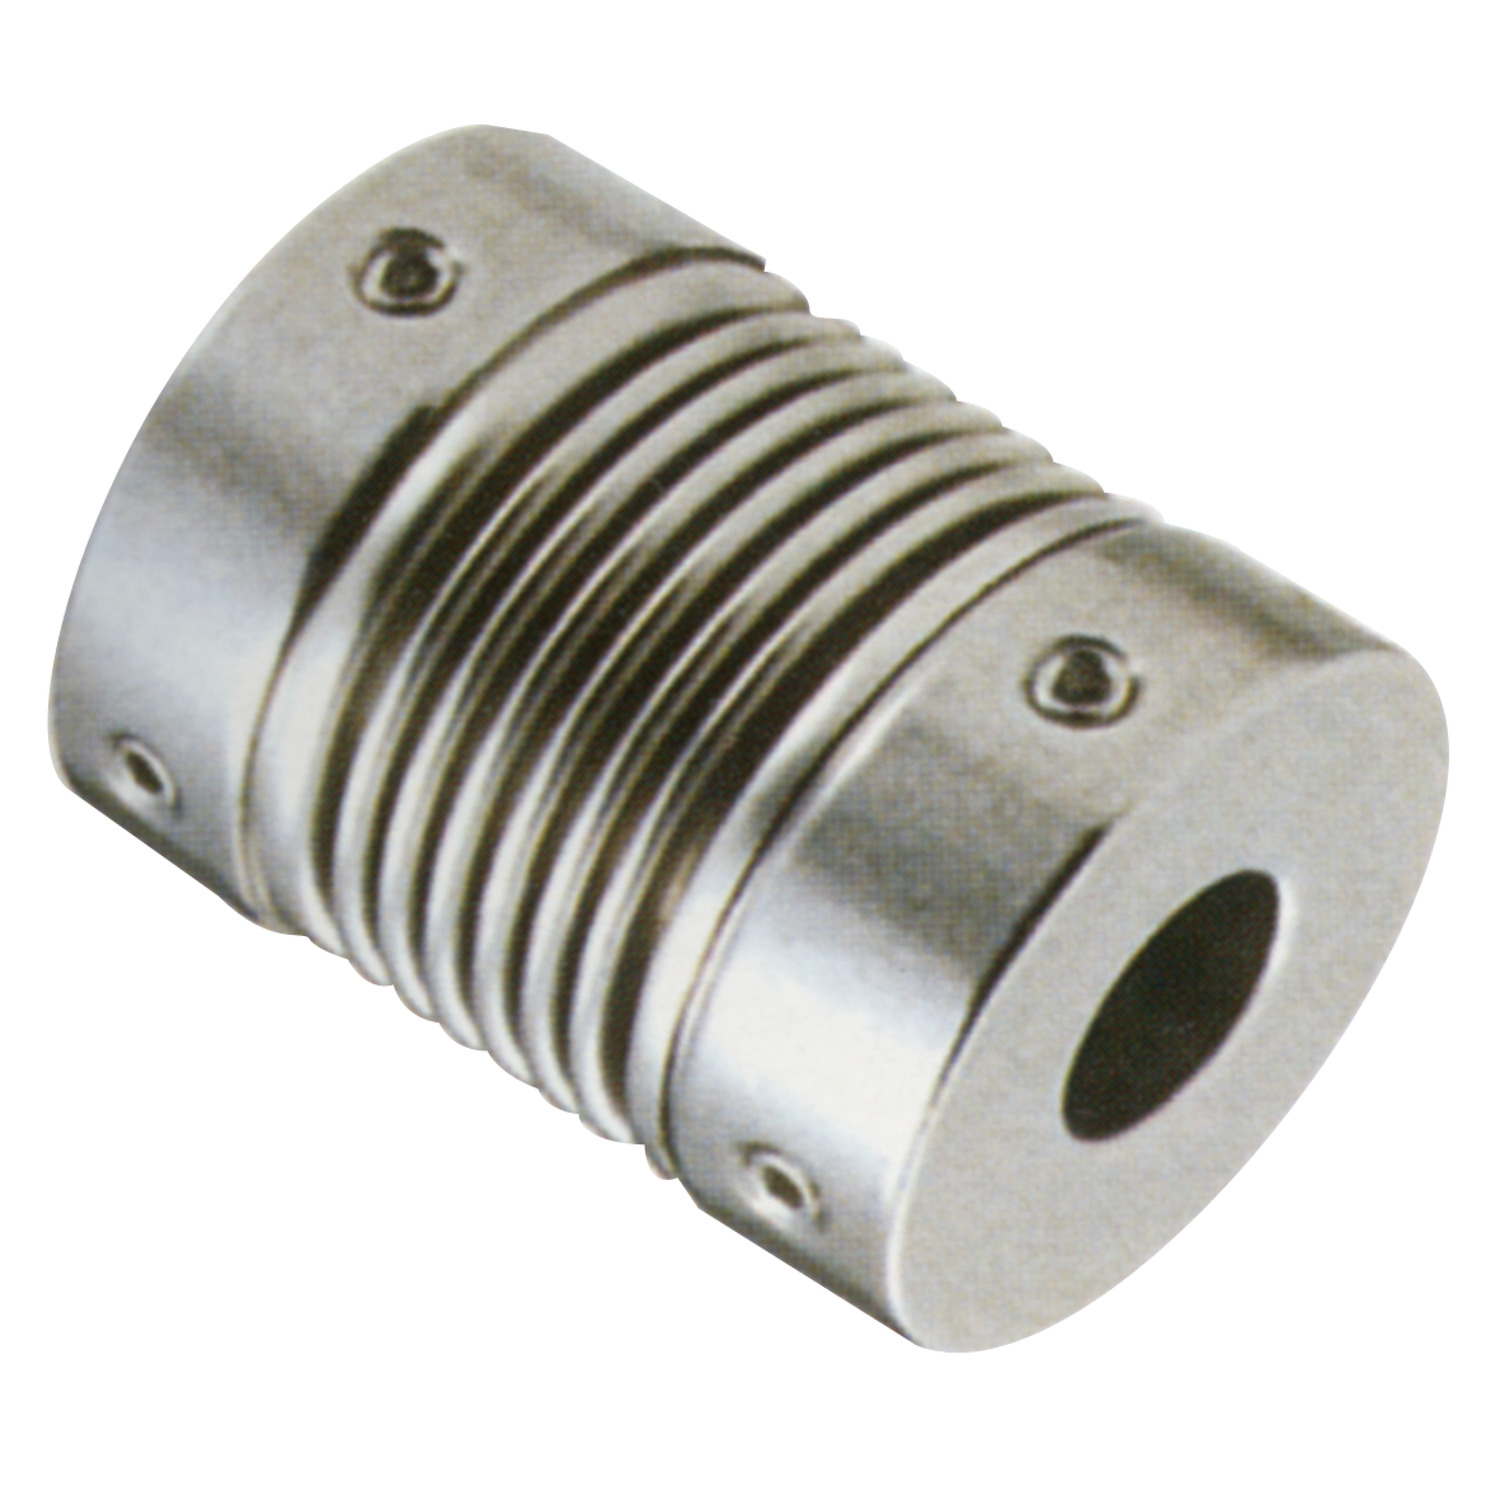 Product R3011, Full Bellows Coupling - Stainless Steel set screw / 